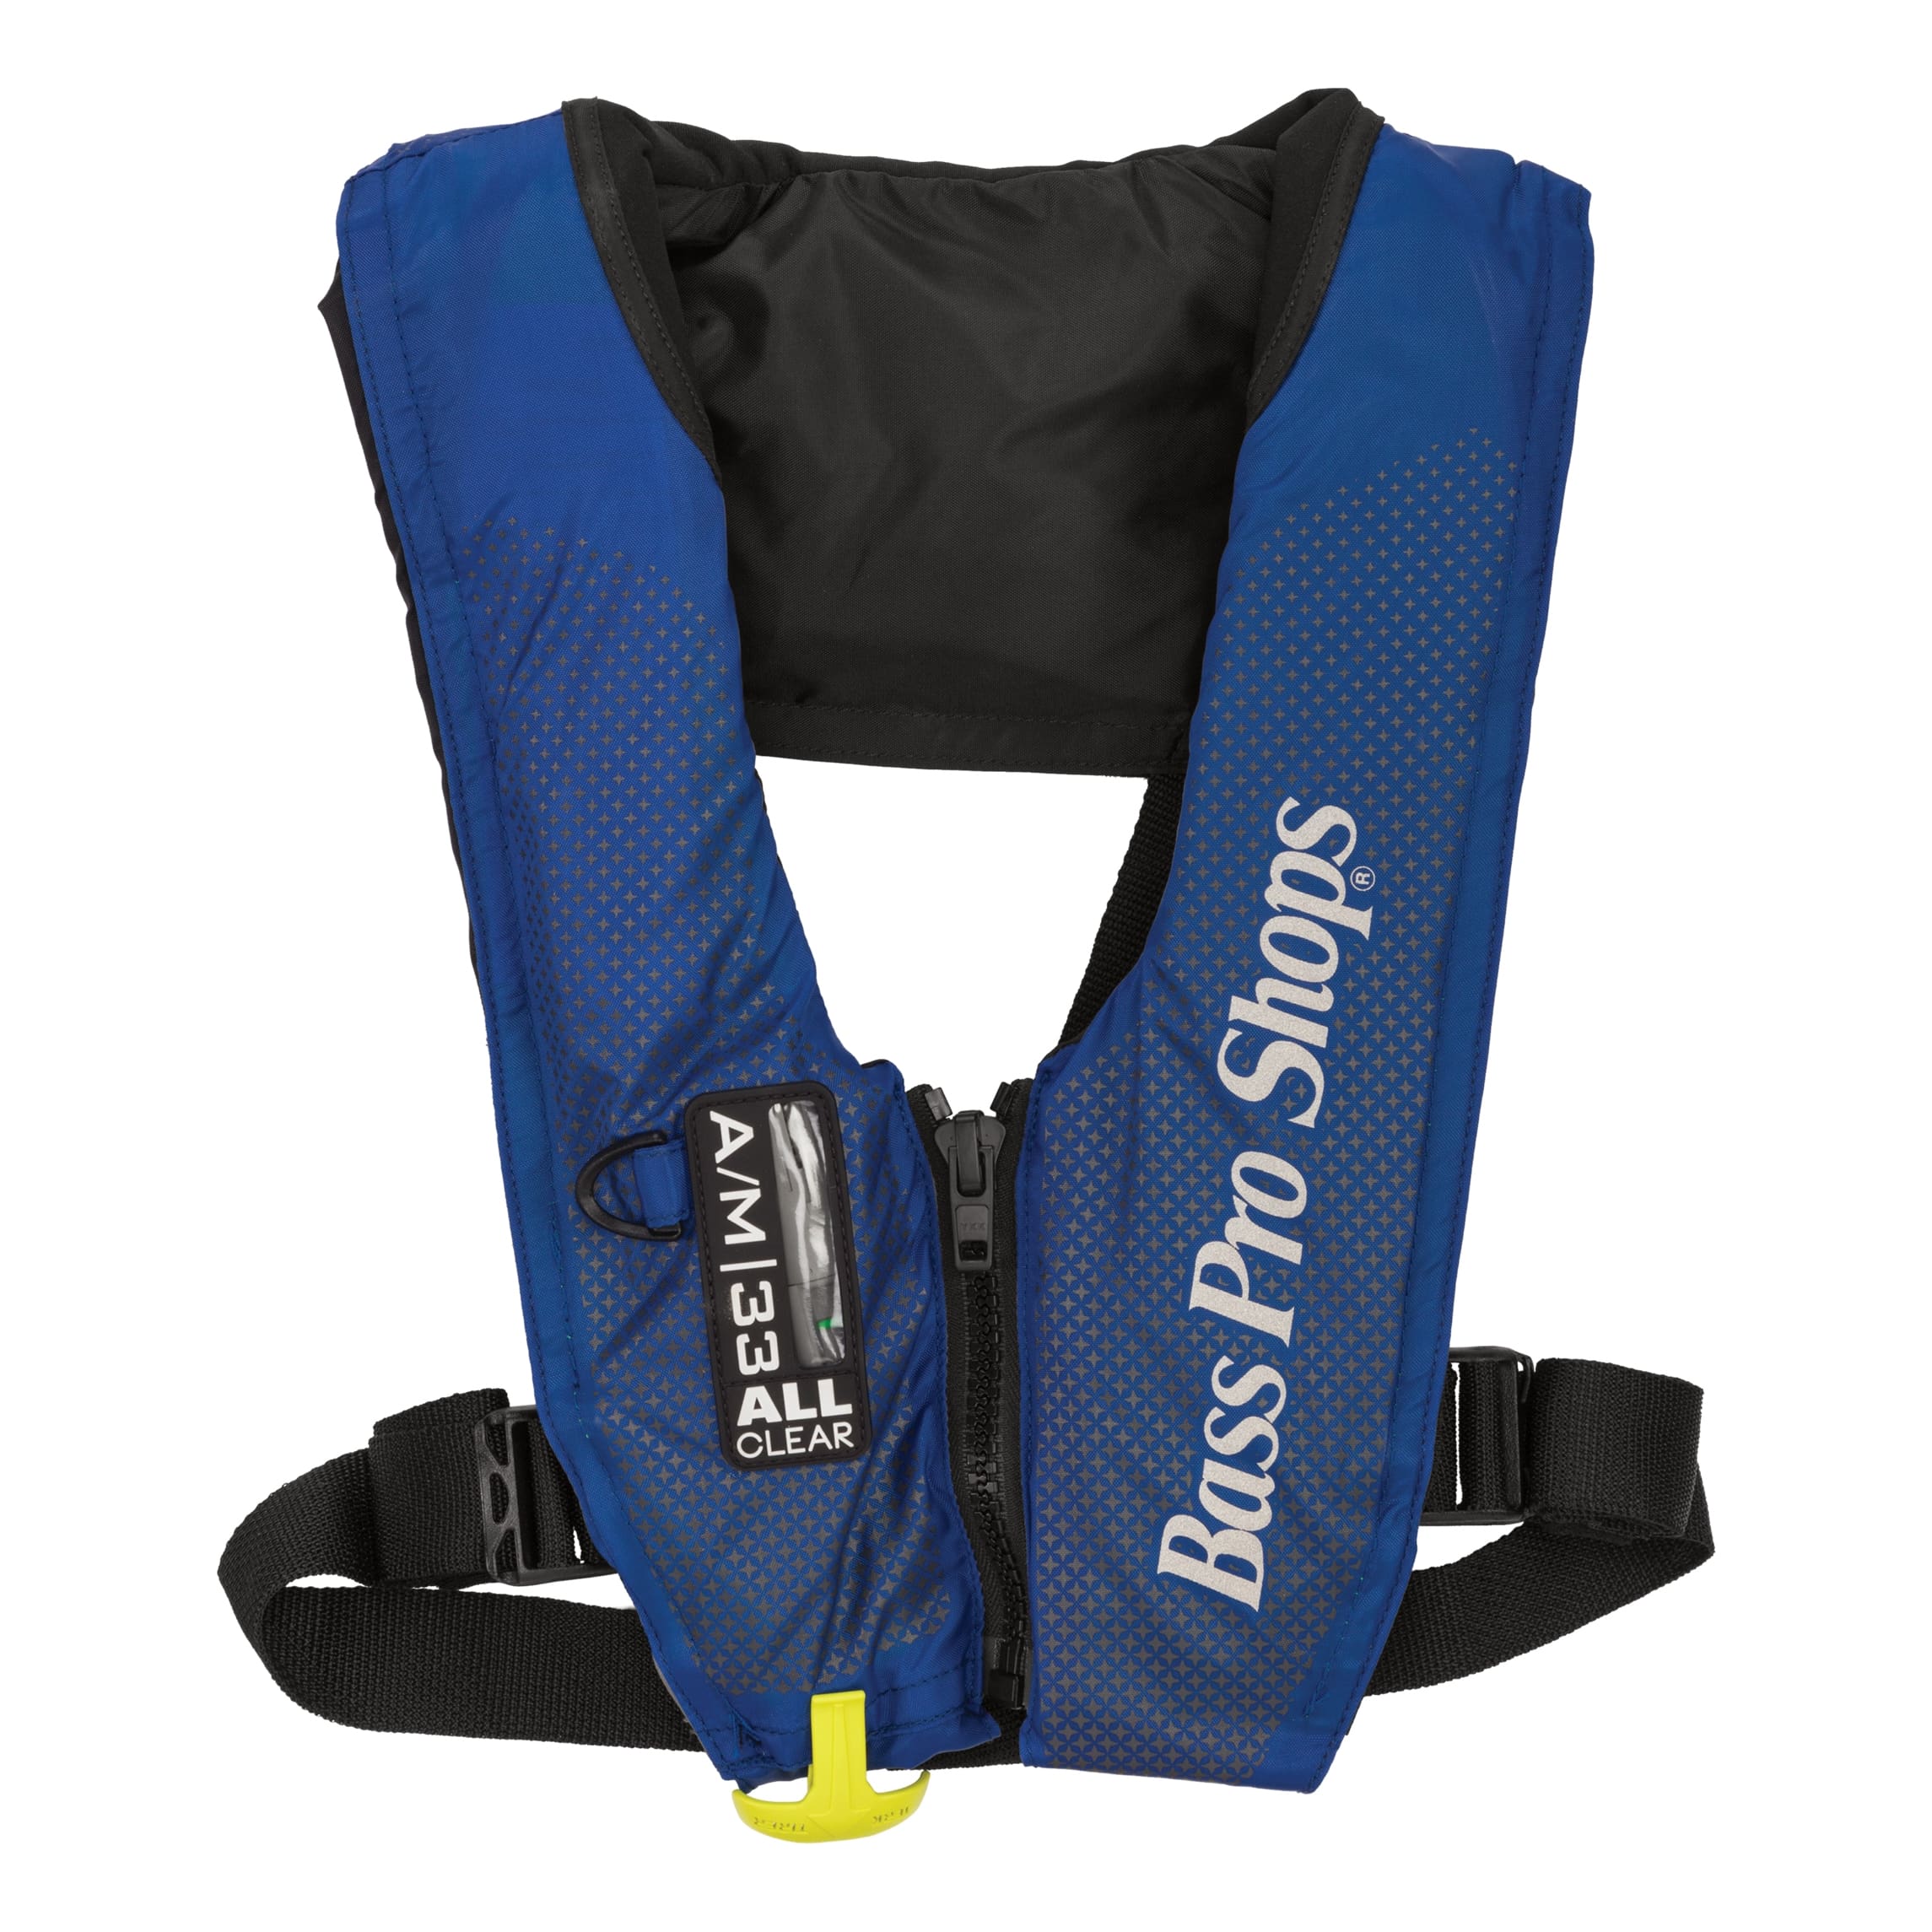 Bass Pro Shops® AM 33 All-Clear™ Auto/Manual-Inflatable Life Vest